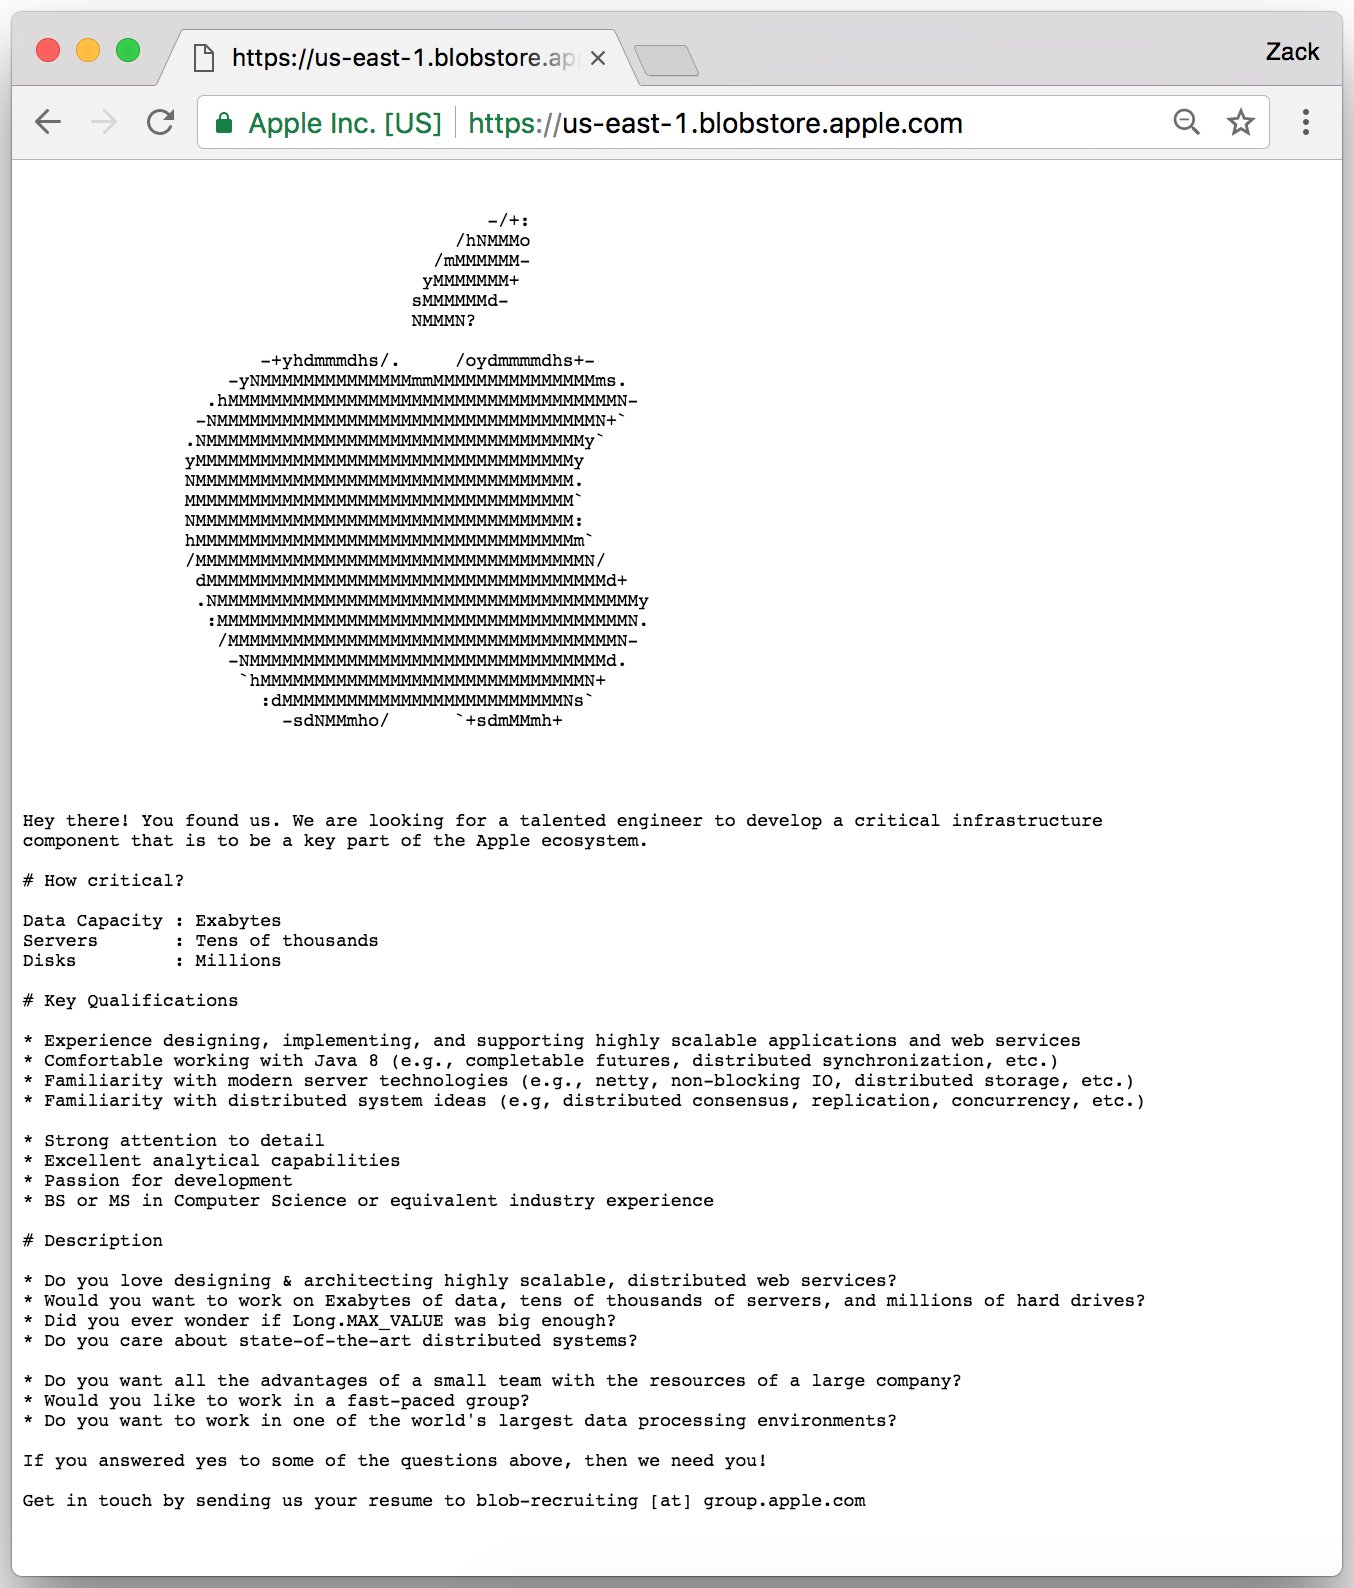 Apple hid a page on its website to hire an engineer for its team of "critical" web servers